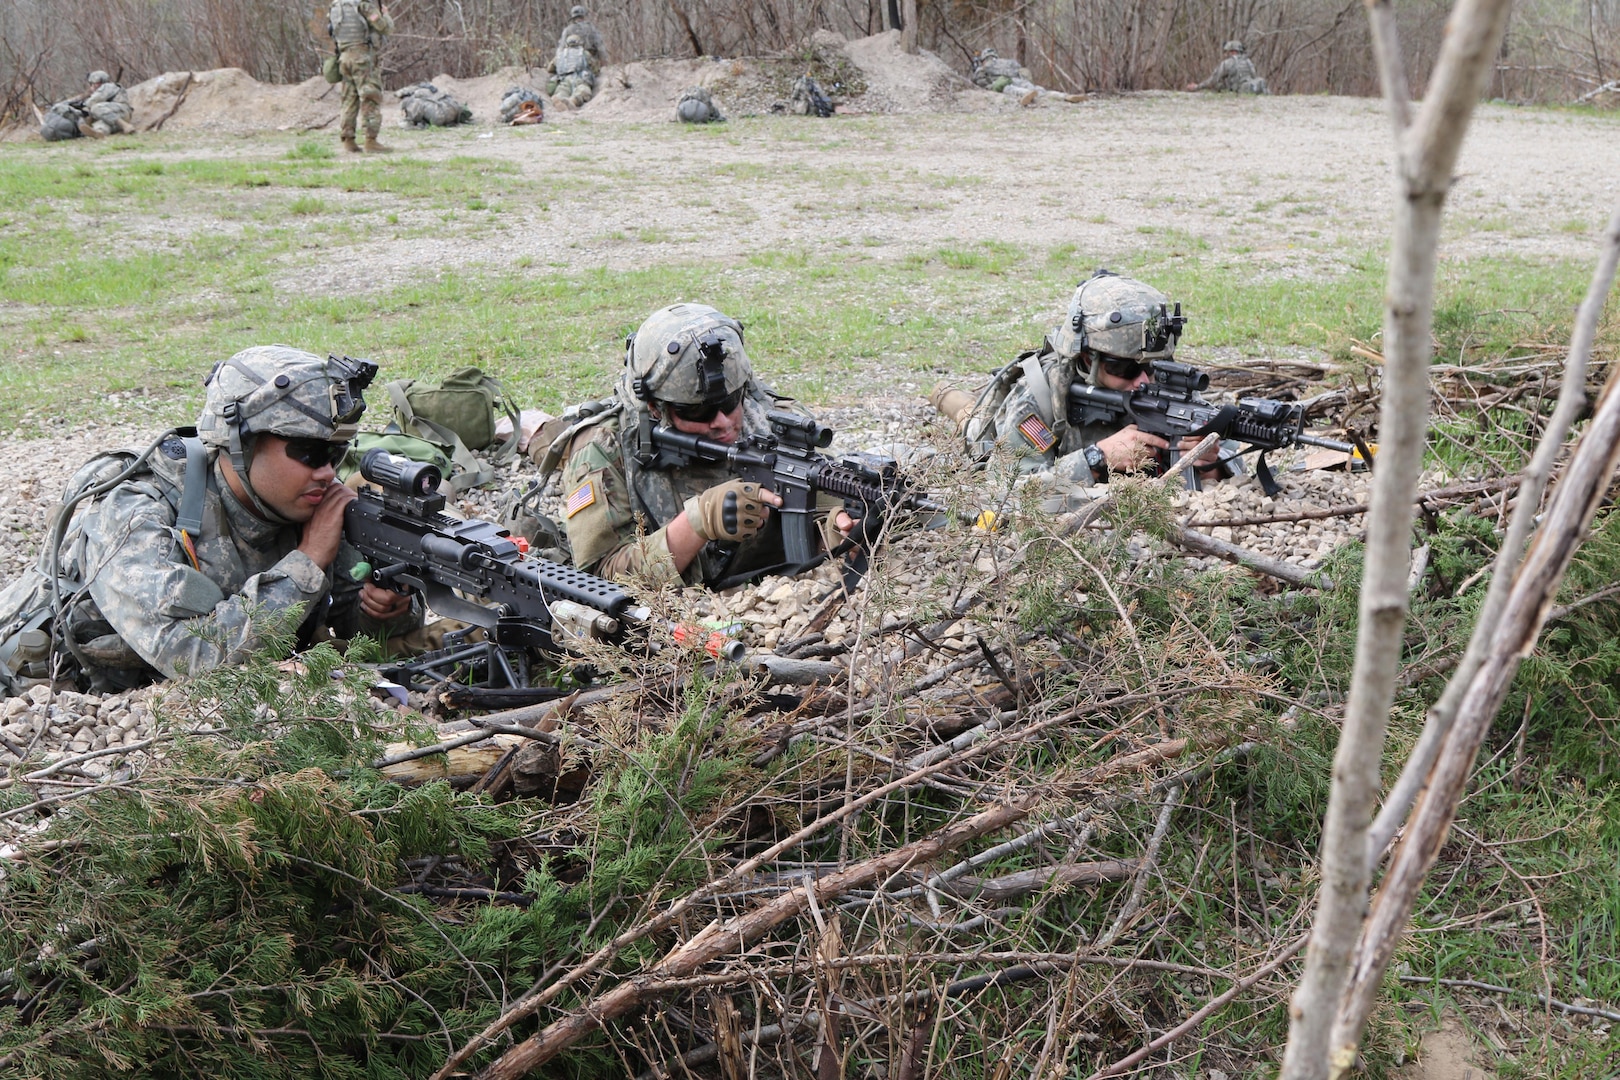 Soldiers from C Co. 1-293rd Infantry Battalion, 76th Infantry Brigade Combat Team, 'Nighthawks,' Indiana Army National Guard, pull security while bunkered down in the defense April 10, 2017, during the Spring Field Training Exercise in preparation for Joint Readiness Training Center rotation, #JRTC, later this summer. 